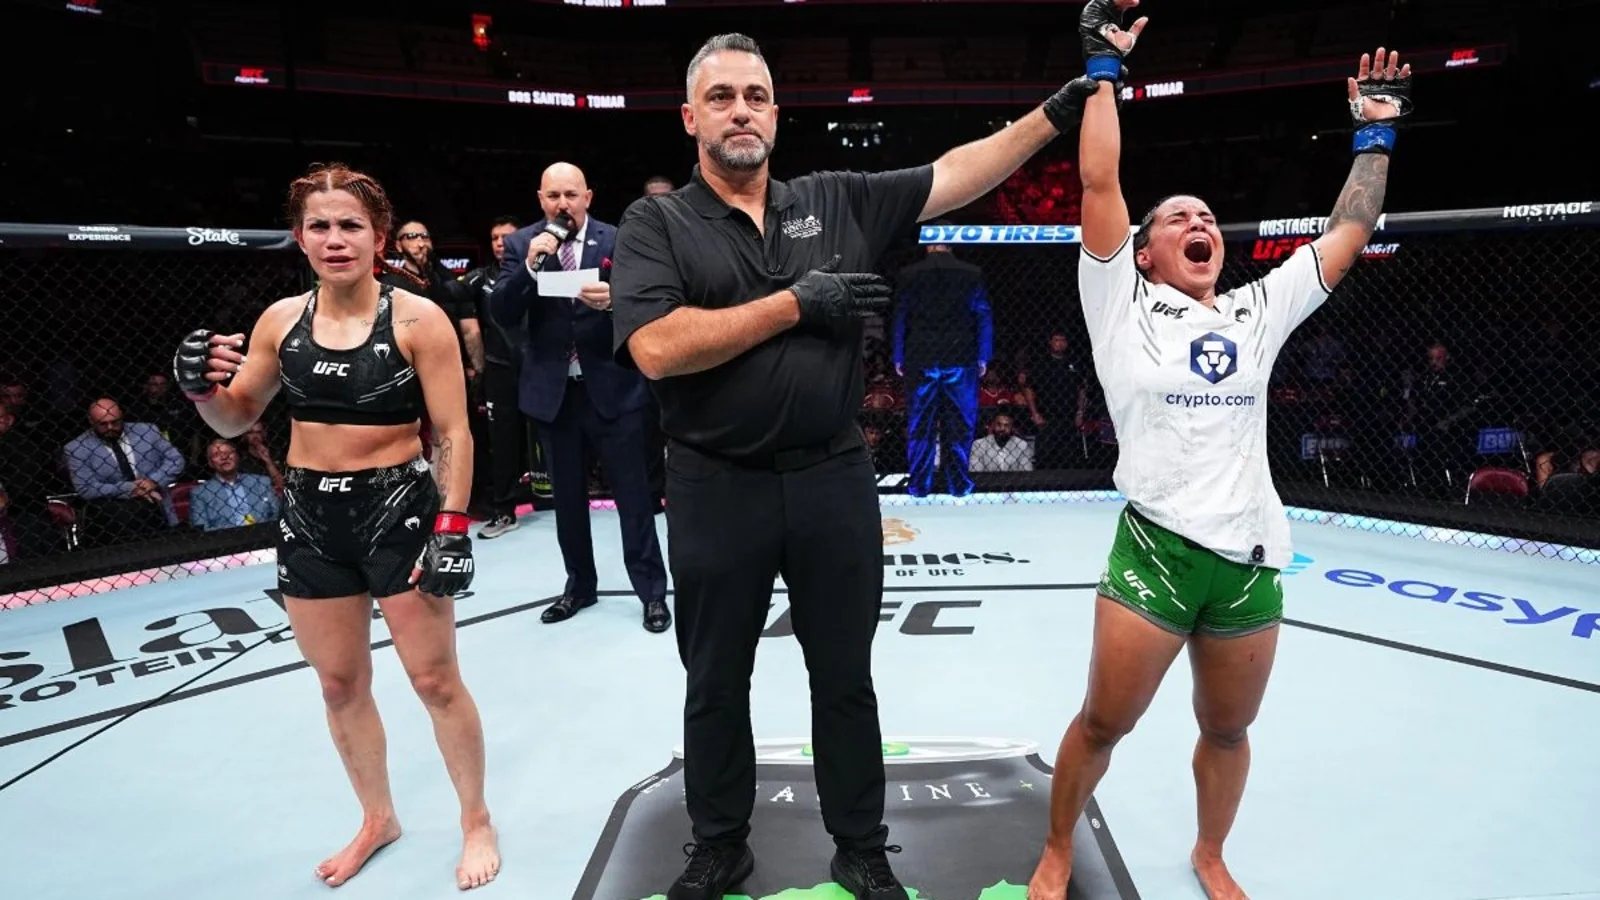 Puja Tomar scripts history, becomes first Indian to win a bout in UFC